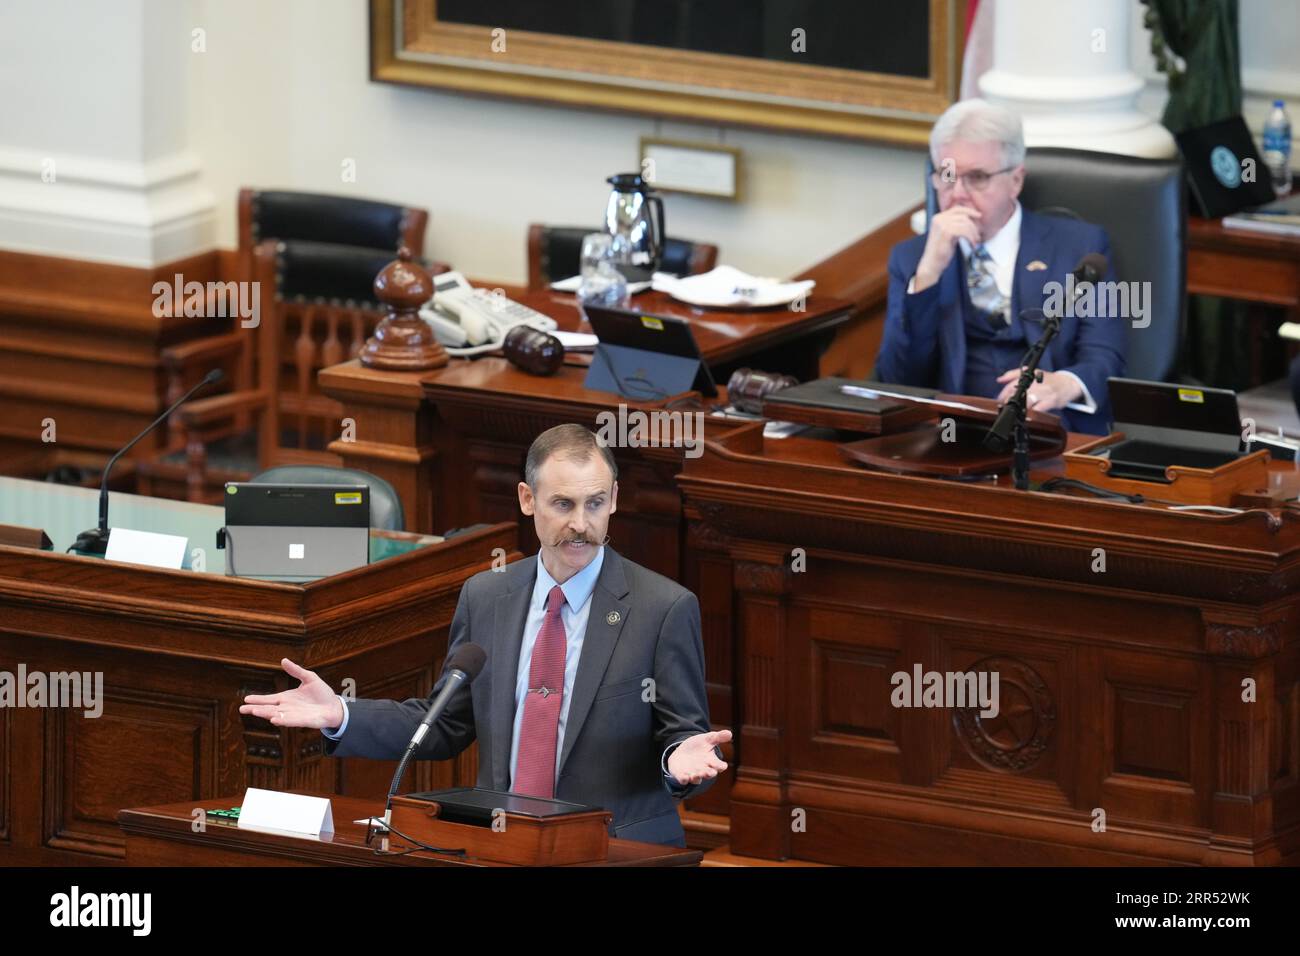 Uder the watchful eye of Lt. Gov. Dan Patrick, Rep. Andrew Murr,  R -Junction gives the House managers opening statement during the afternoon session of Day 1 of the Ken Paxton impeachment trial in the Texas Senate. Stock Photo